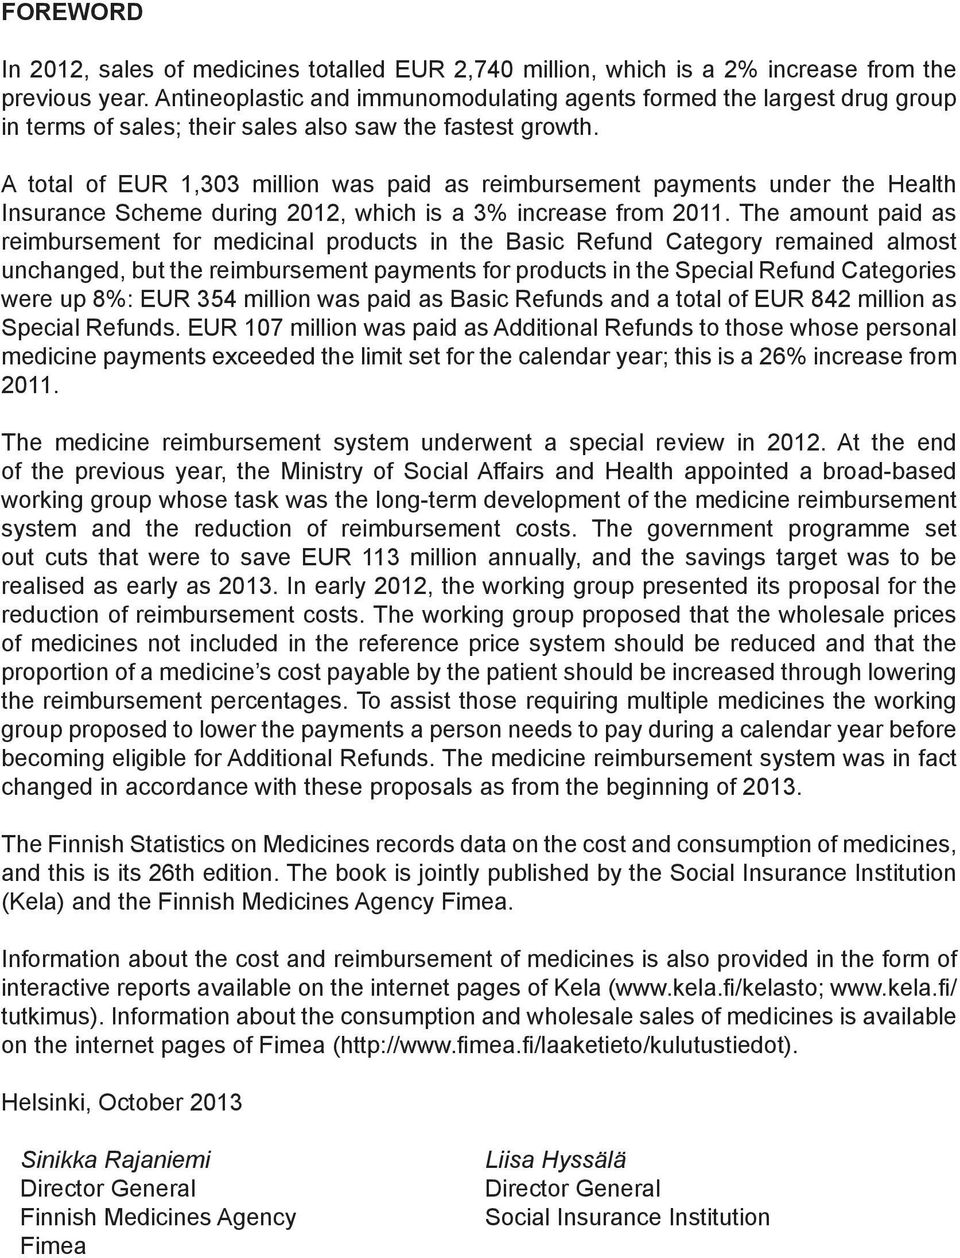 A total of EUR 1,303 million was paid as reimbursement payments under the Health Insurance Scheme during 2012, which is a 3% increase from 2011.